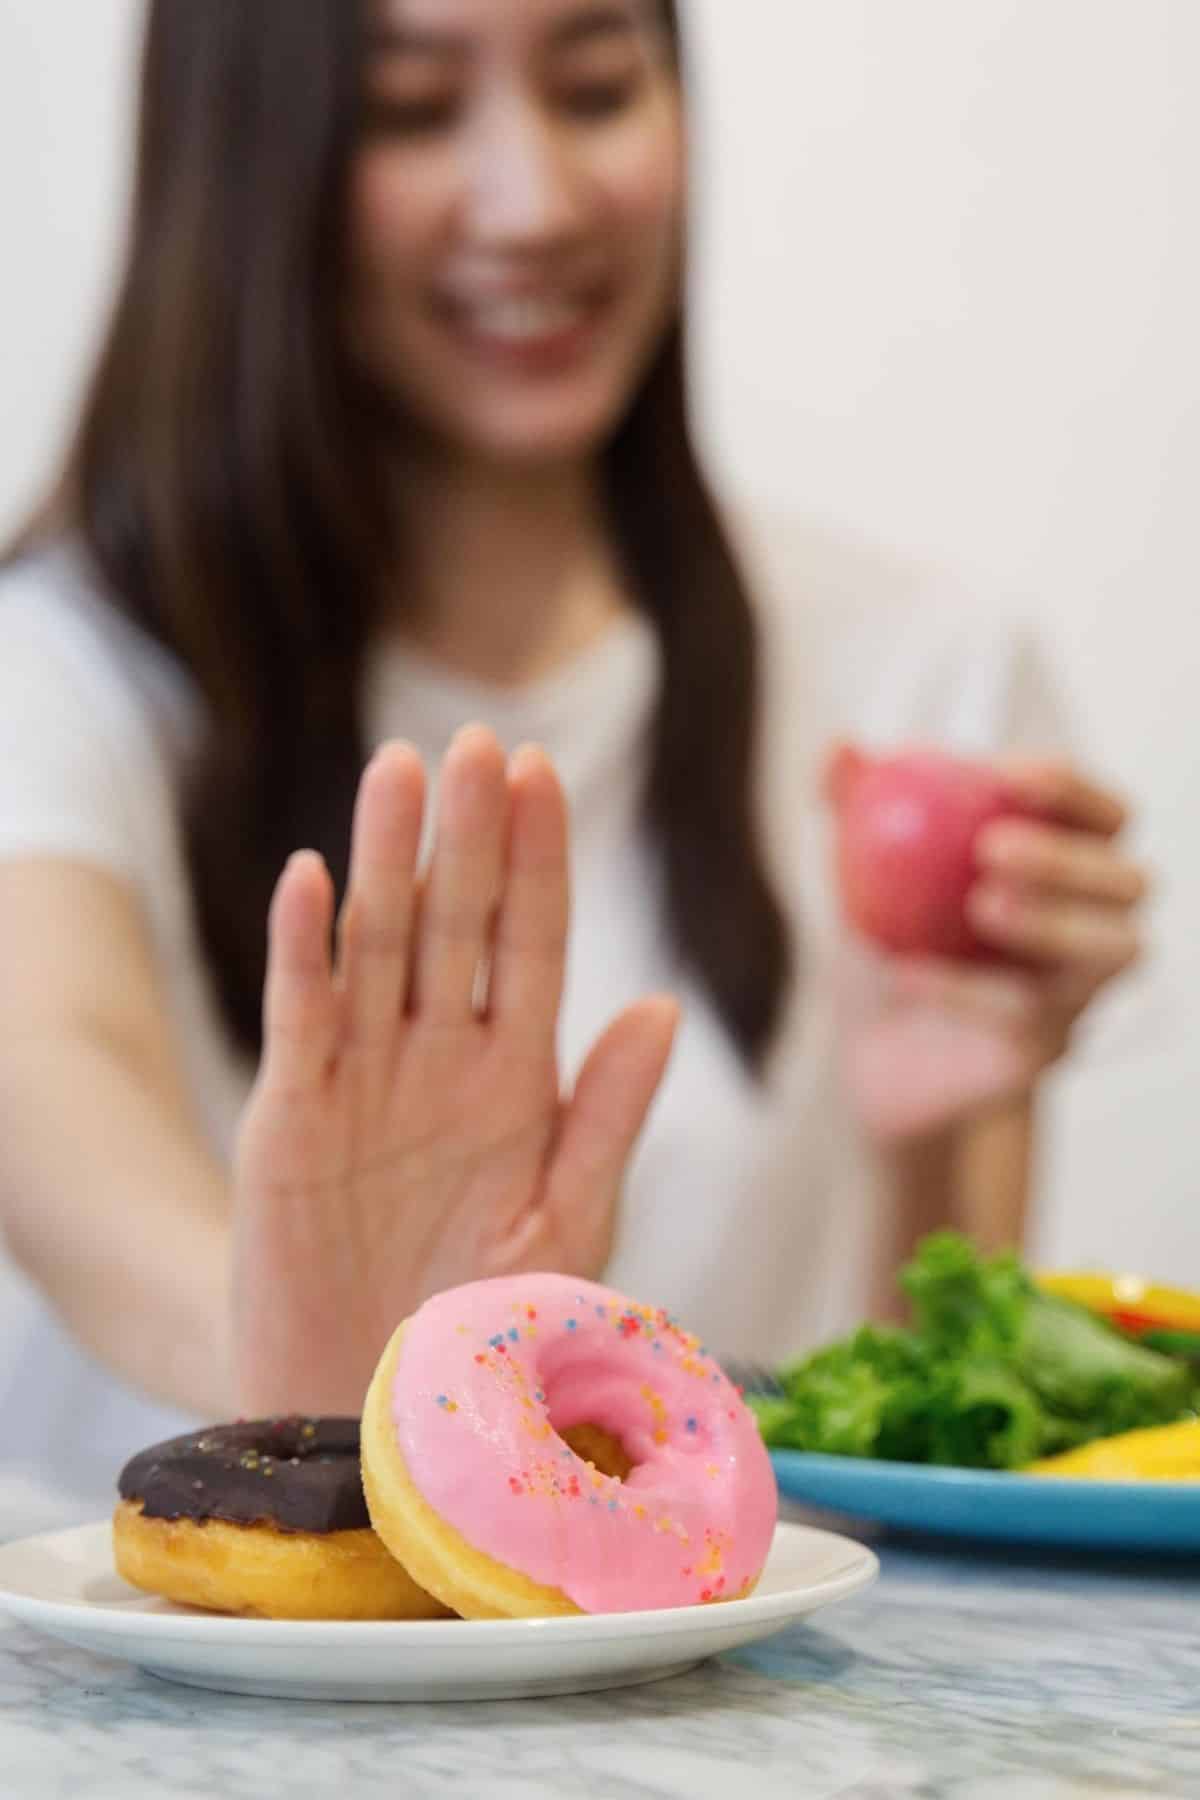 woman pushing away a donut in favor of healthier foods